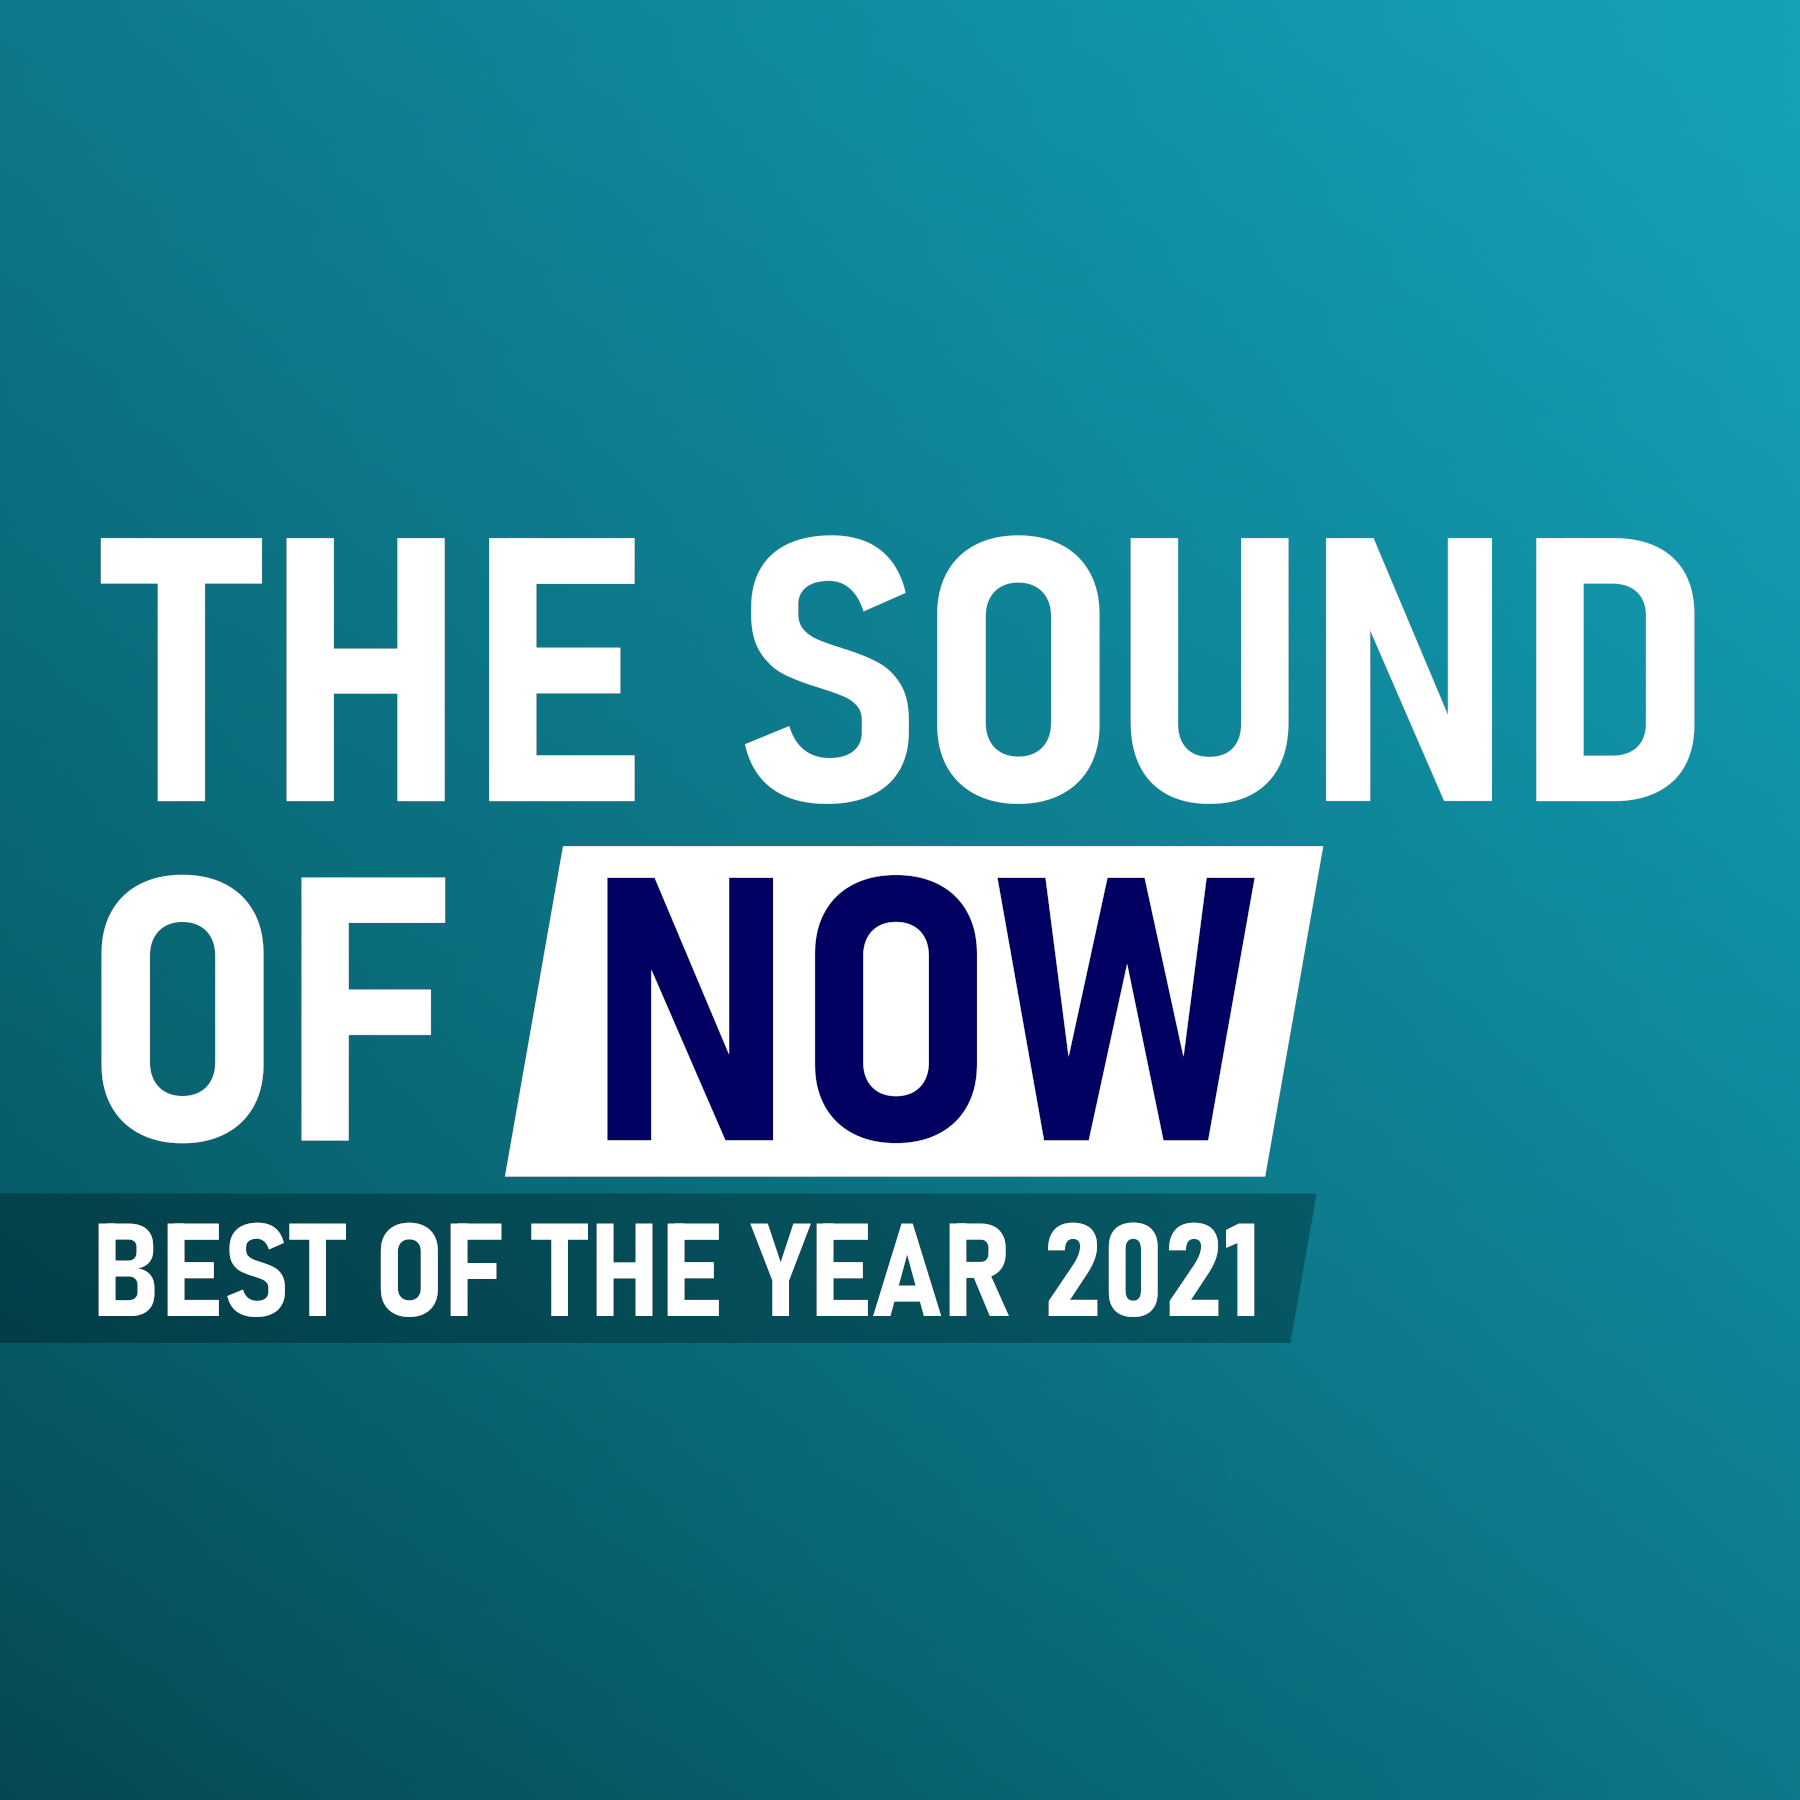 Playlist: 8 December 2021 – The Sound of Now Awards 2021